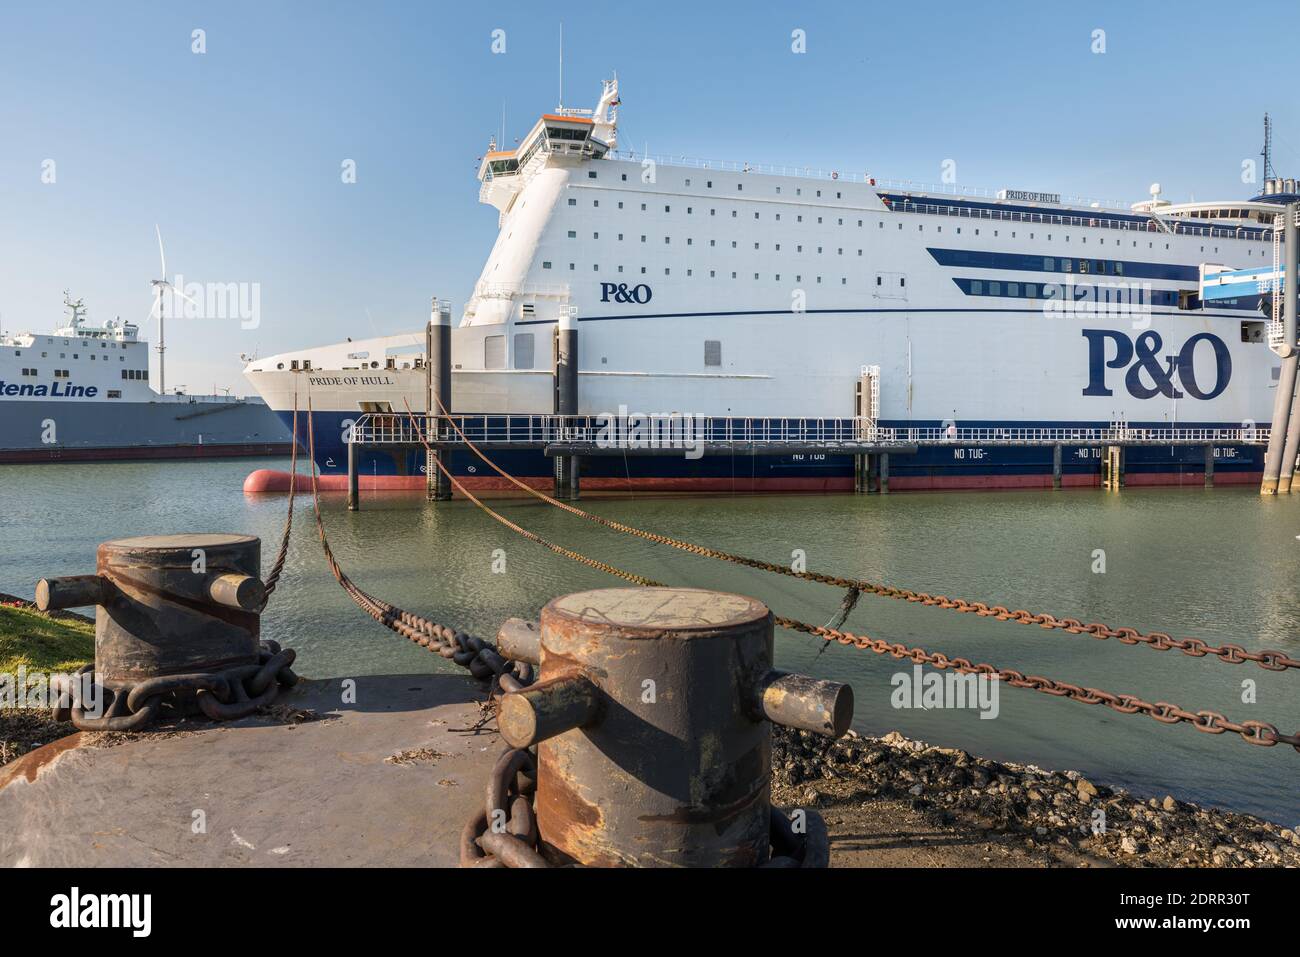 ROTTERDAM EUROPOORT, THE NETHERLANDS - FEBRUARY 29, 2016: The ferry Pride of Hull is chained at the quay of P&O North Sea Ferries in Rotterdam Europoo Stock Photo